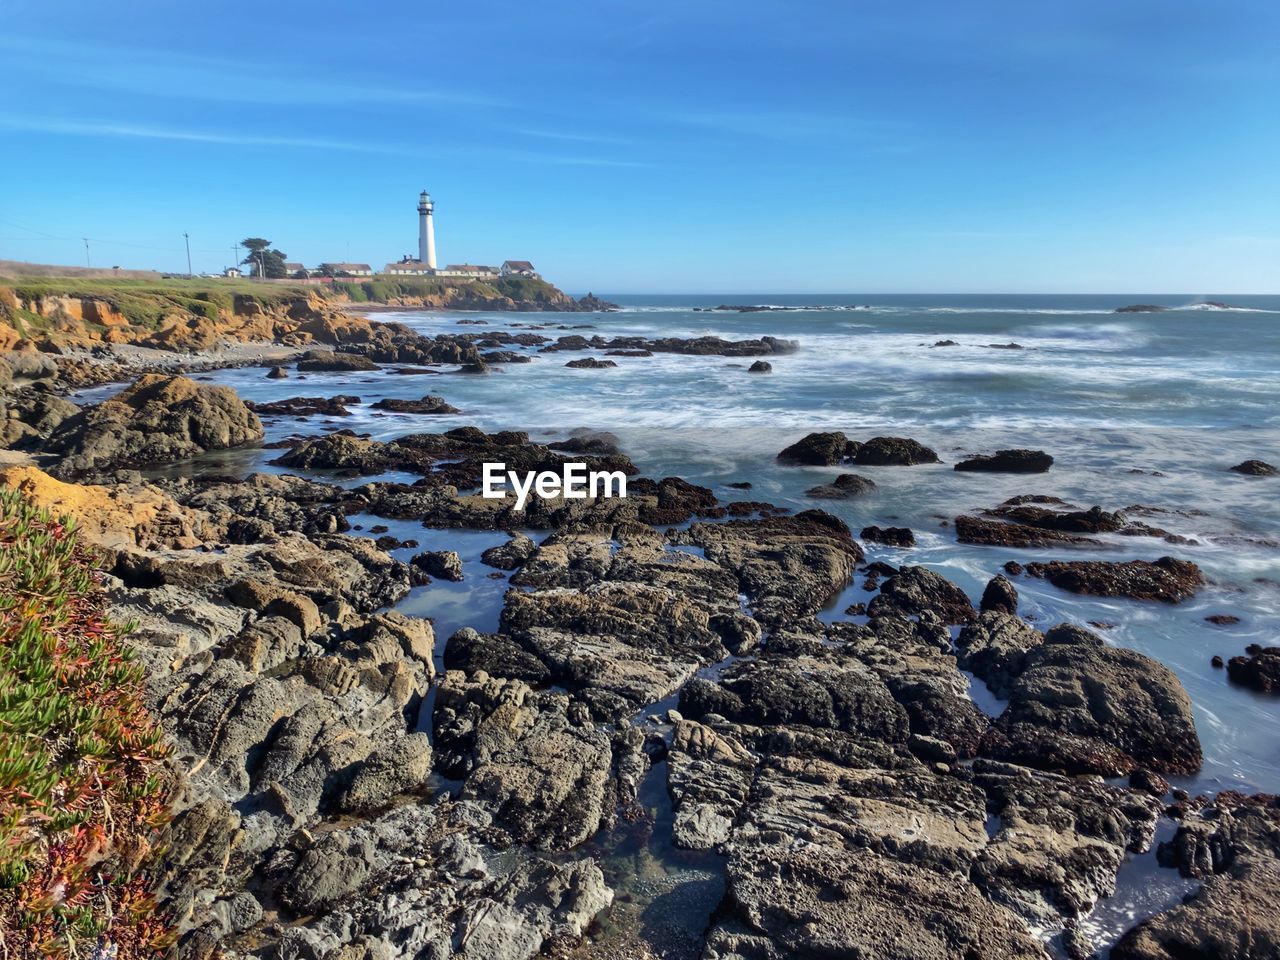 Pigeon point lighthouse landscape from pigeon point bluffs, blue sky, rocky coastline foreground